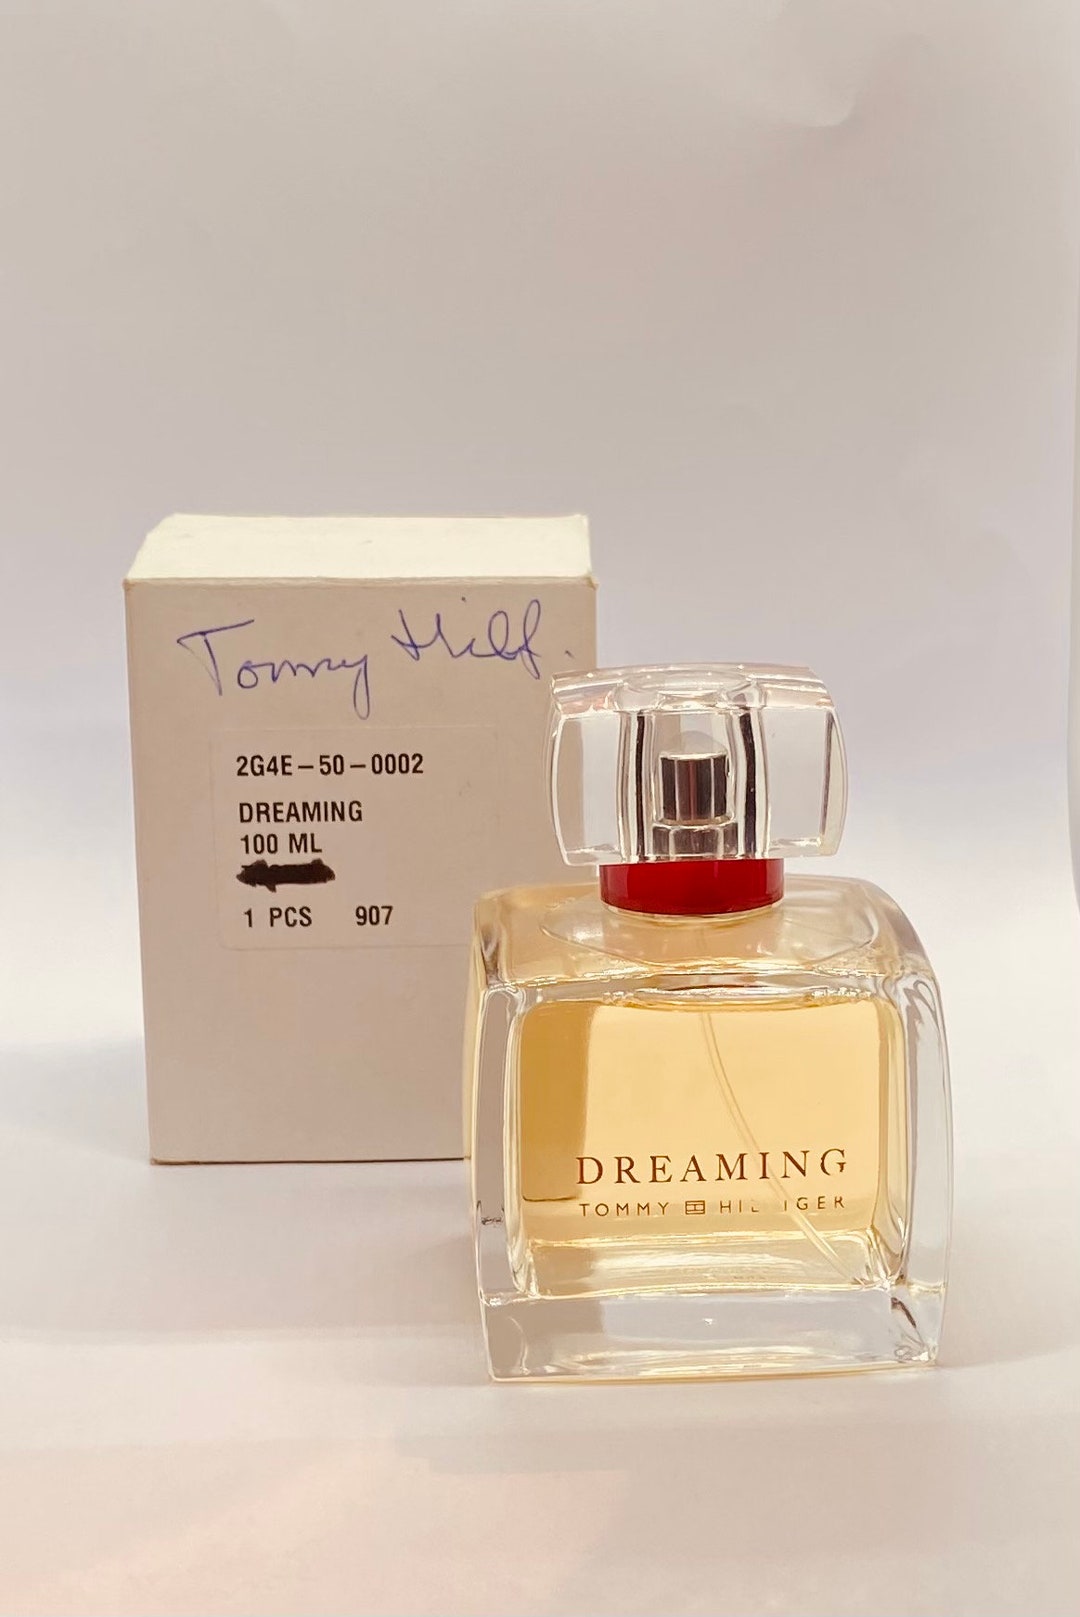 Dreaming Tommy Hilfiger perfume For 100ml 3.4 - Etsy 日本